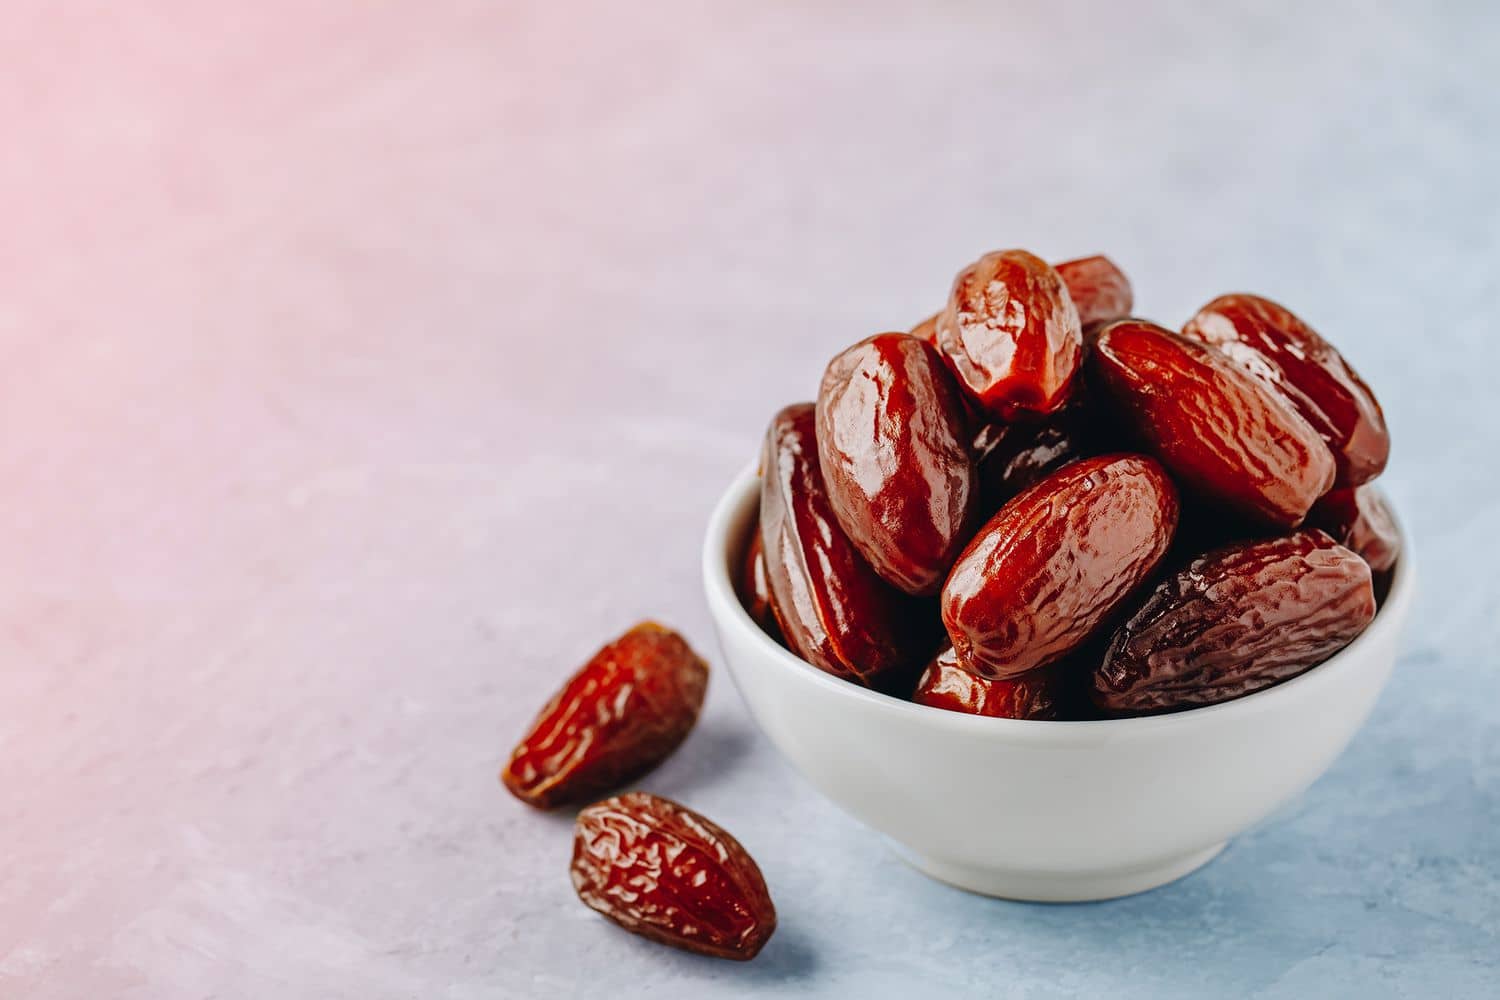 10 Impressive Health Benefits of Dates: A Nutritious and Delicious Superfood